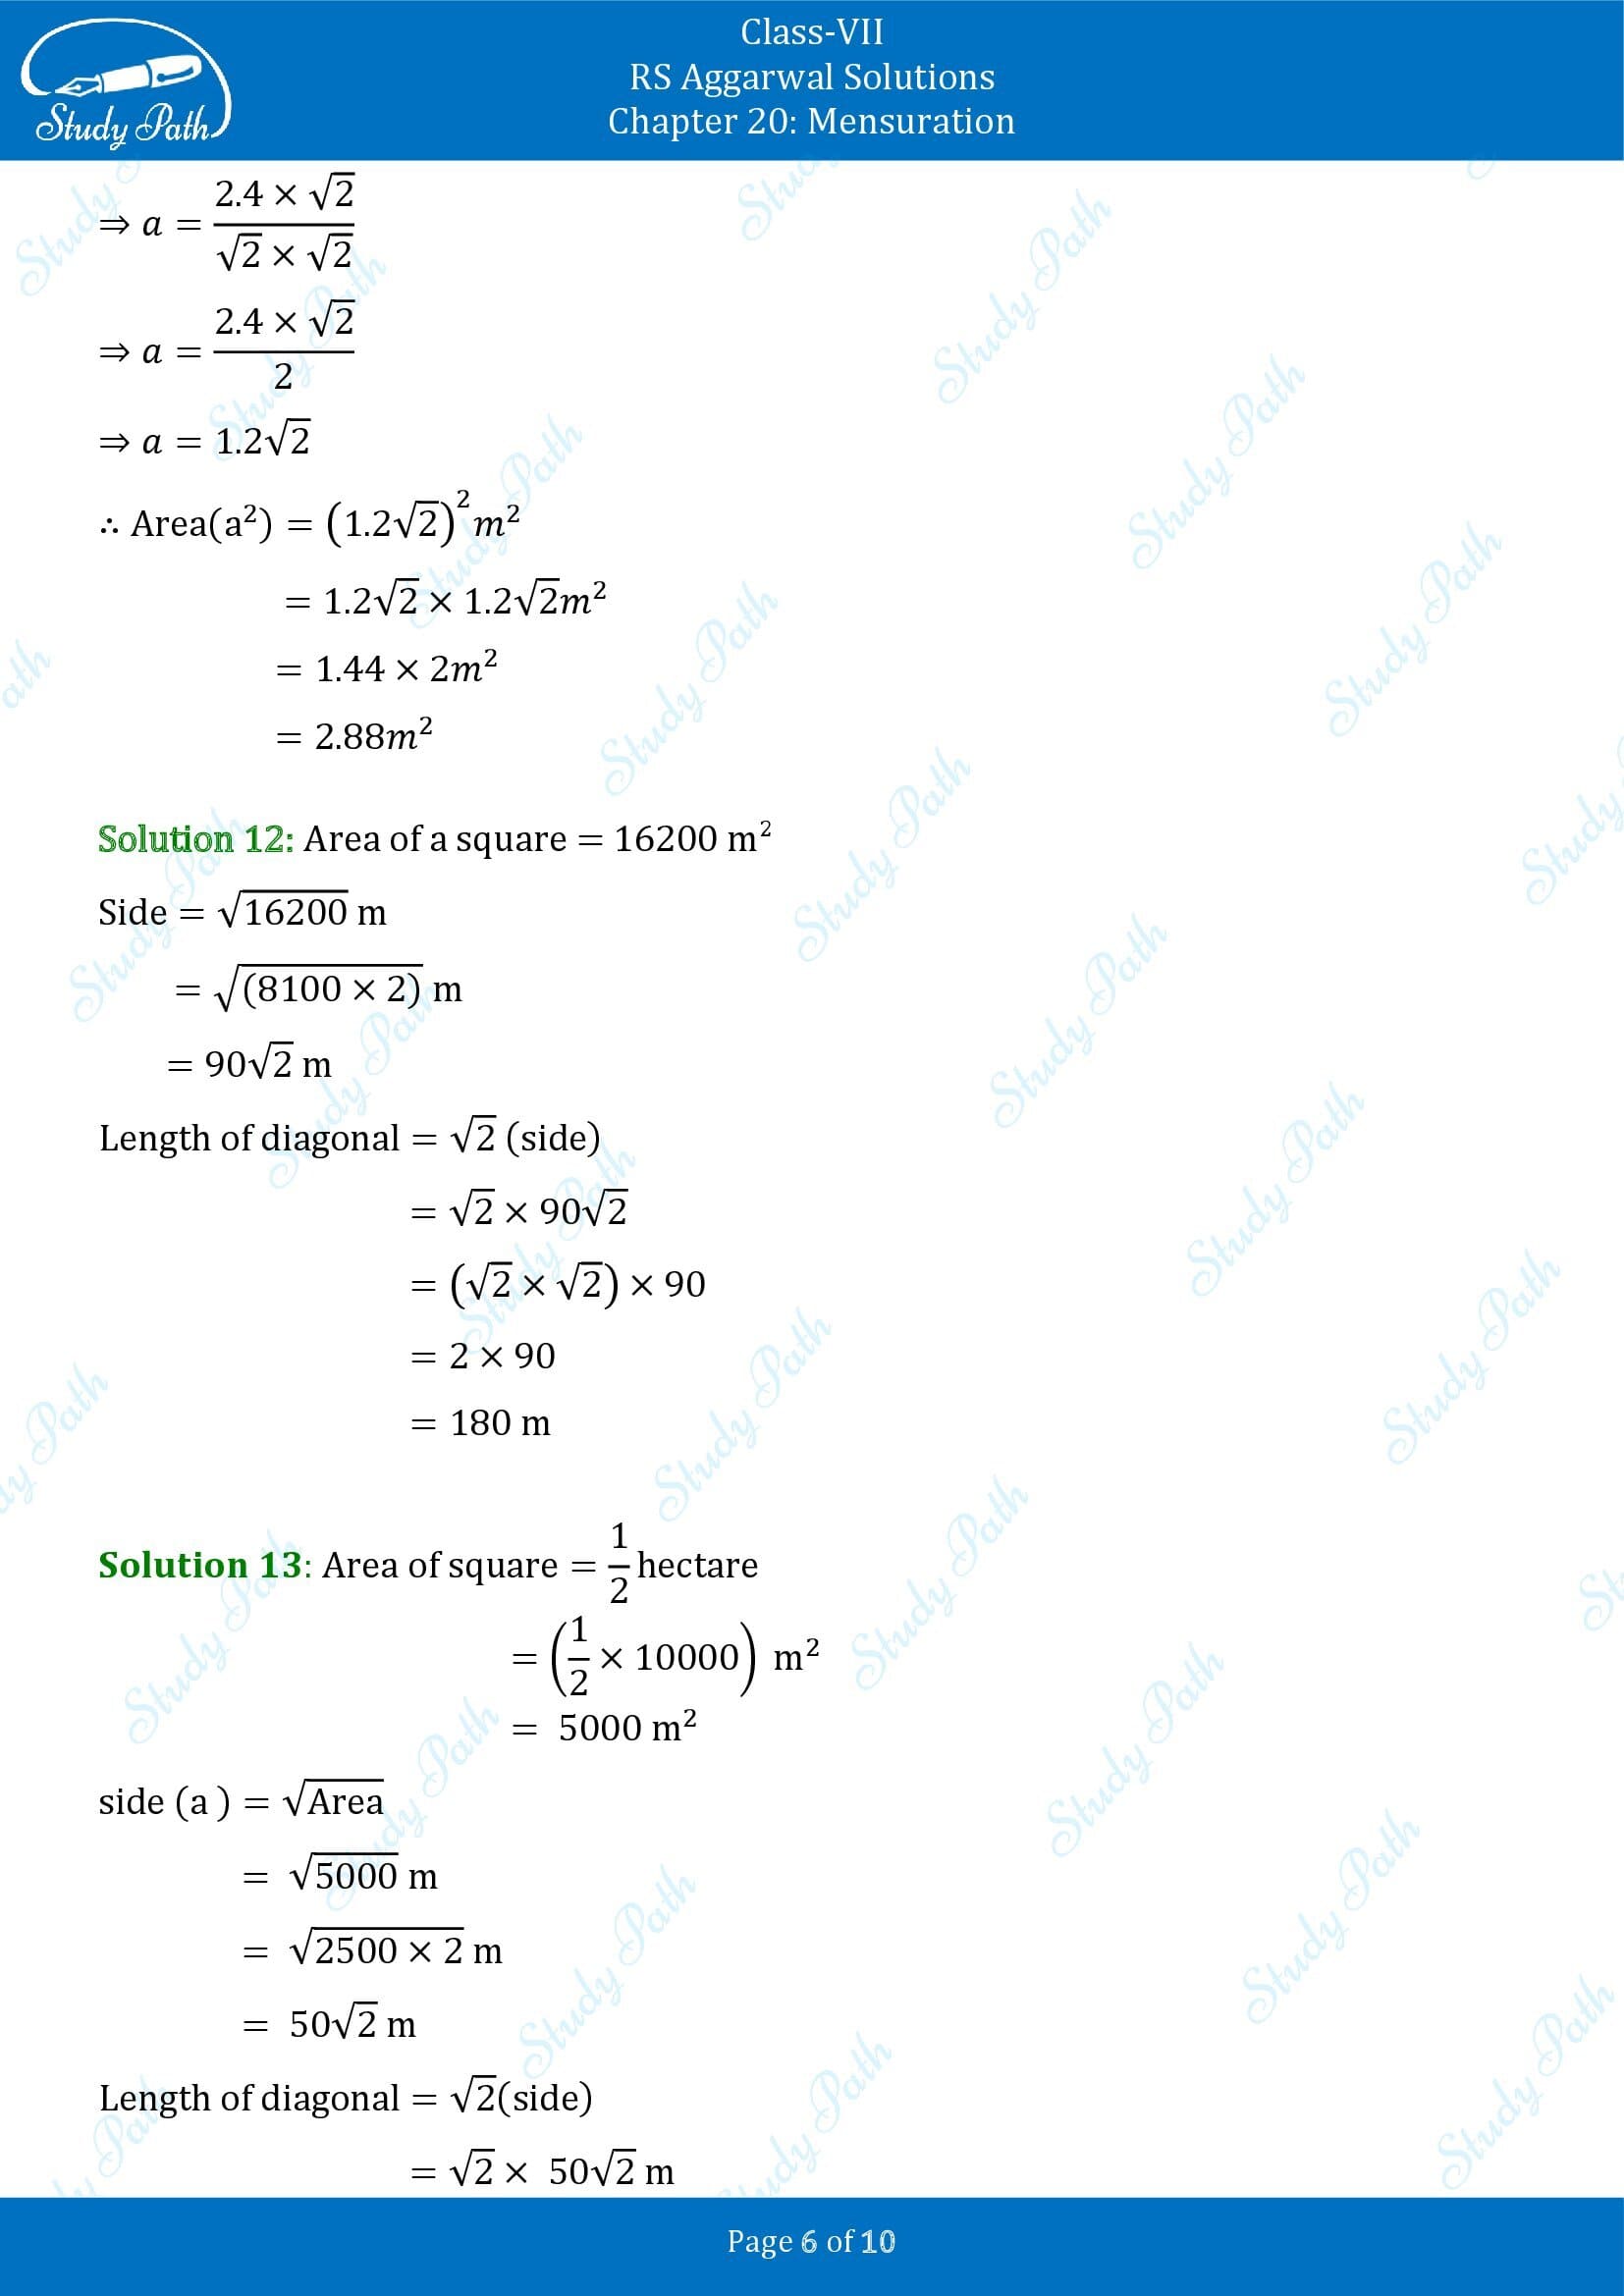 RS Aggarwal Solutions Class 7 Chapter 20 Mensuration Exercise 20A 00006